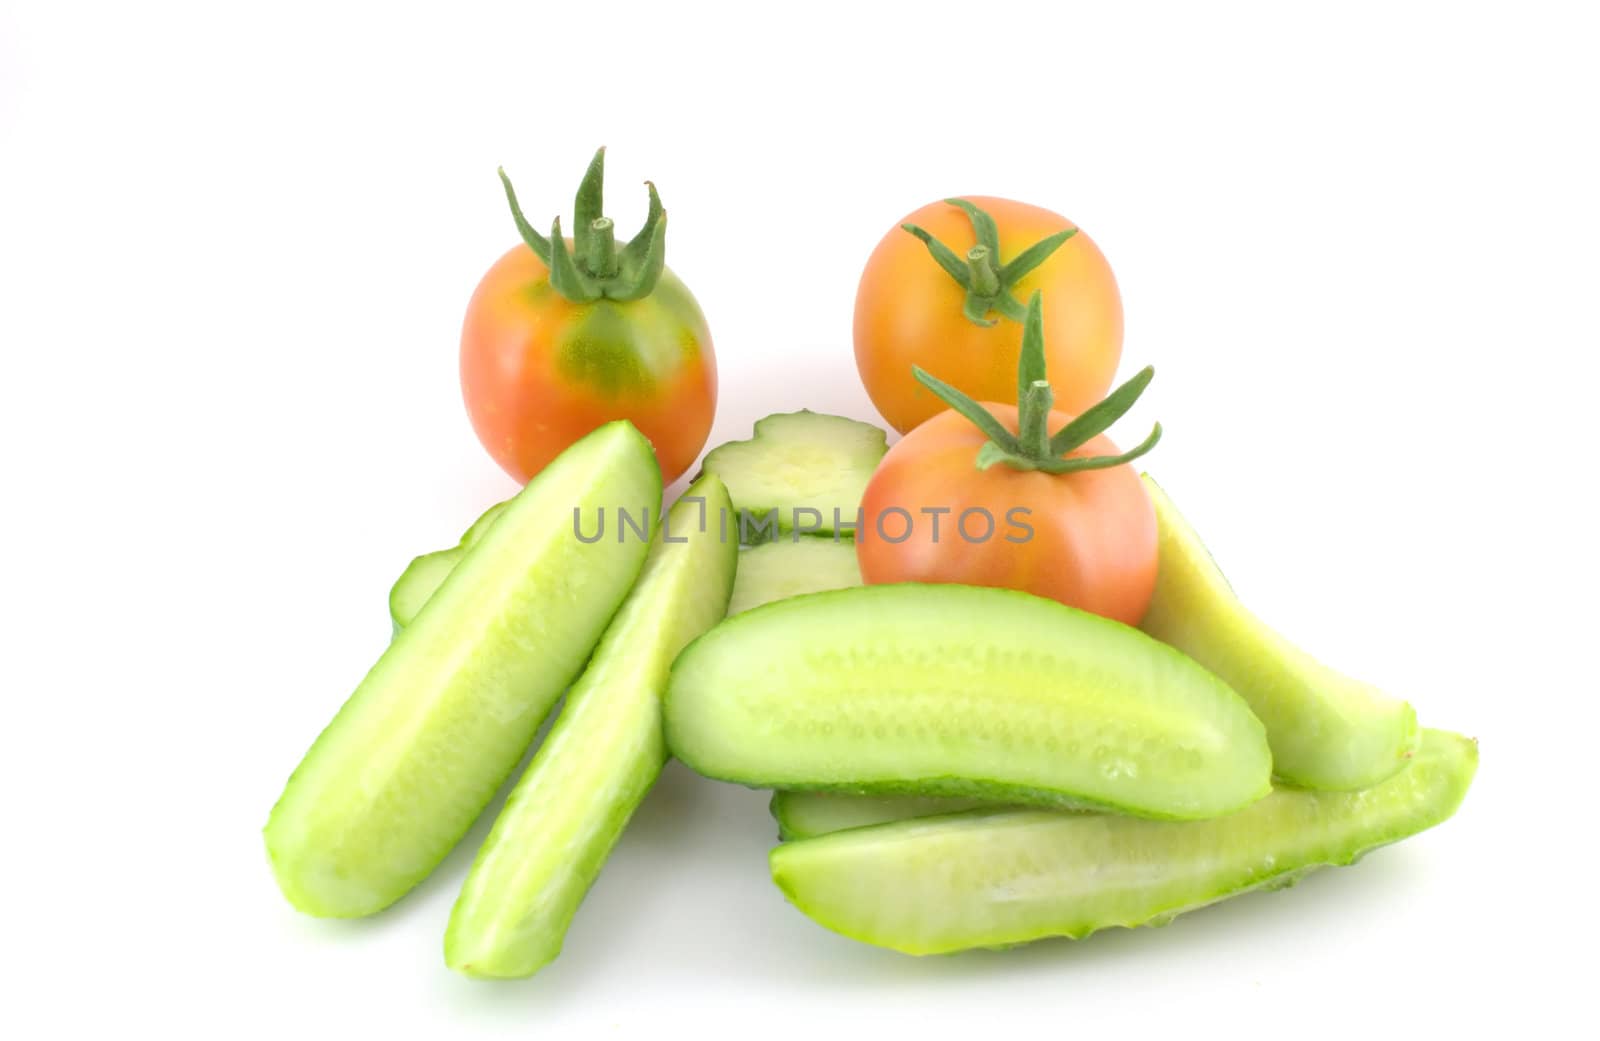 Cutted cucumber and tomatoes by sergpet